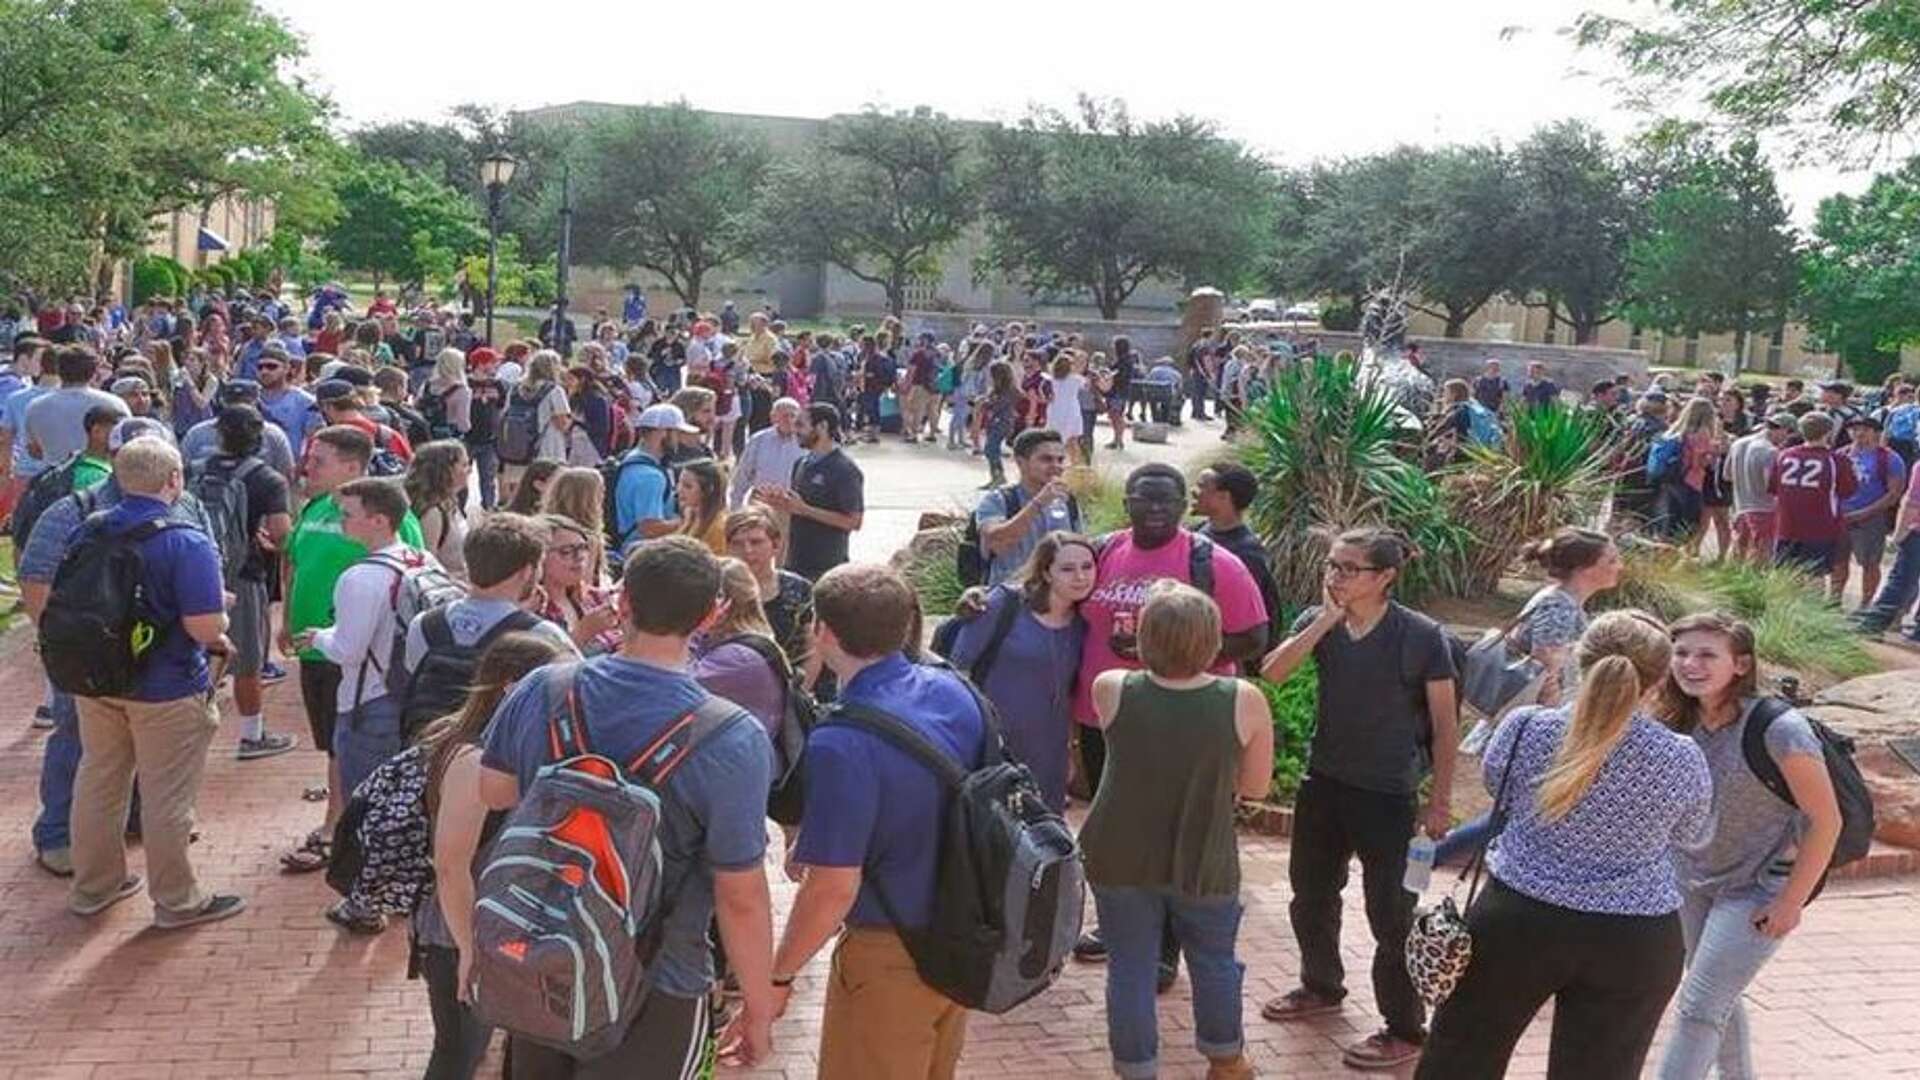 Students gathering in the LCU mall area